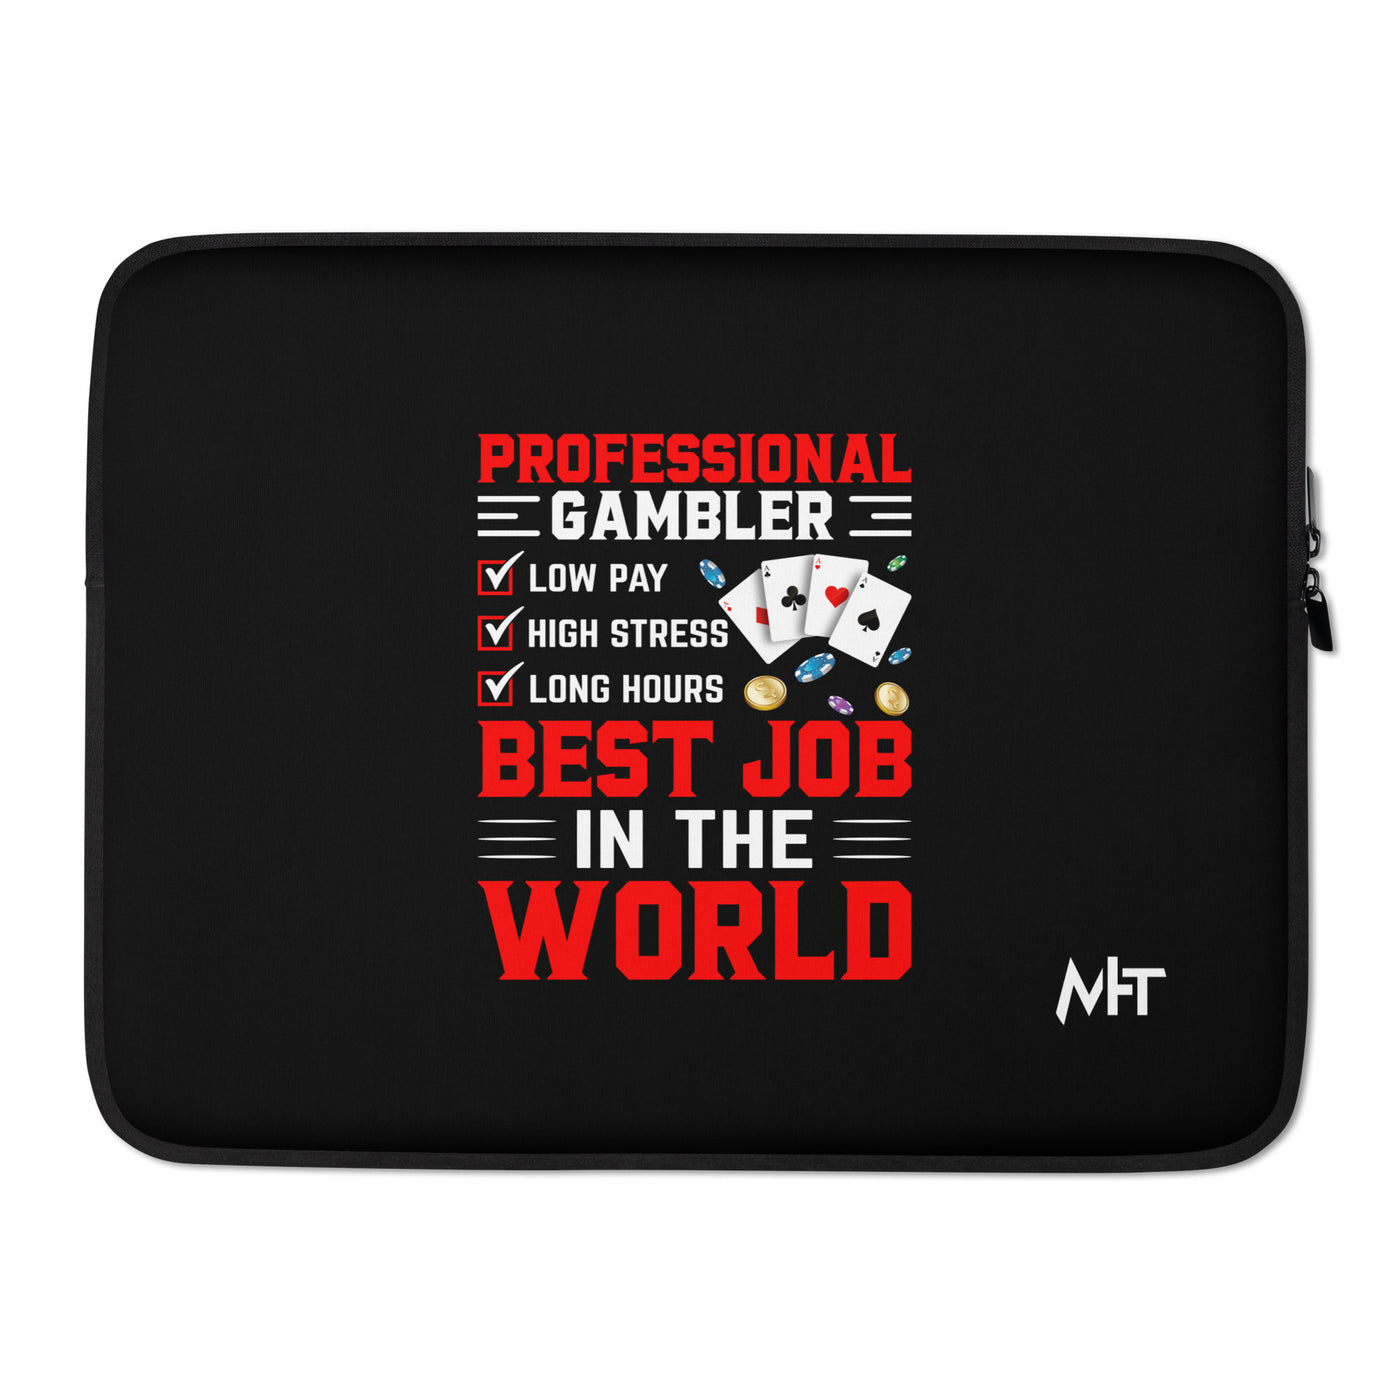 Professional Gambler: The Best Job in the World - Laptop Sleeve